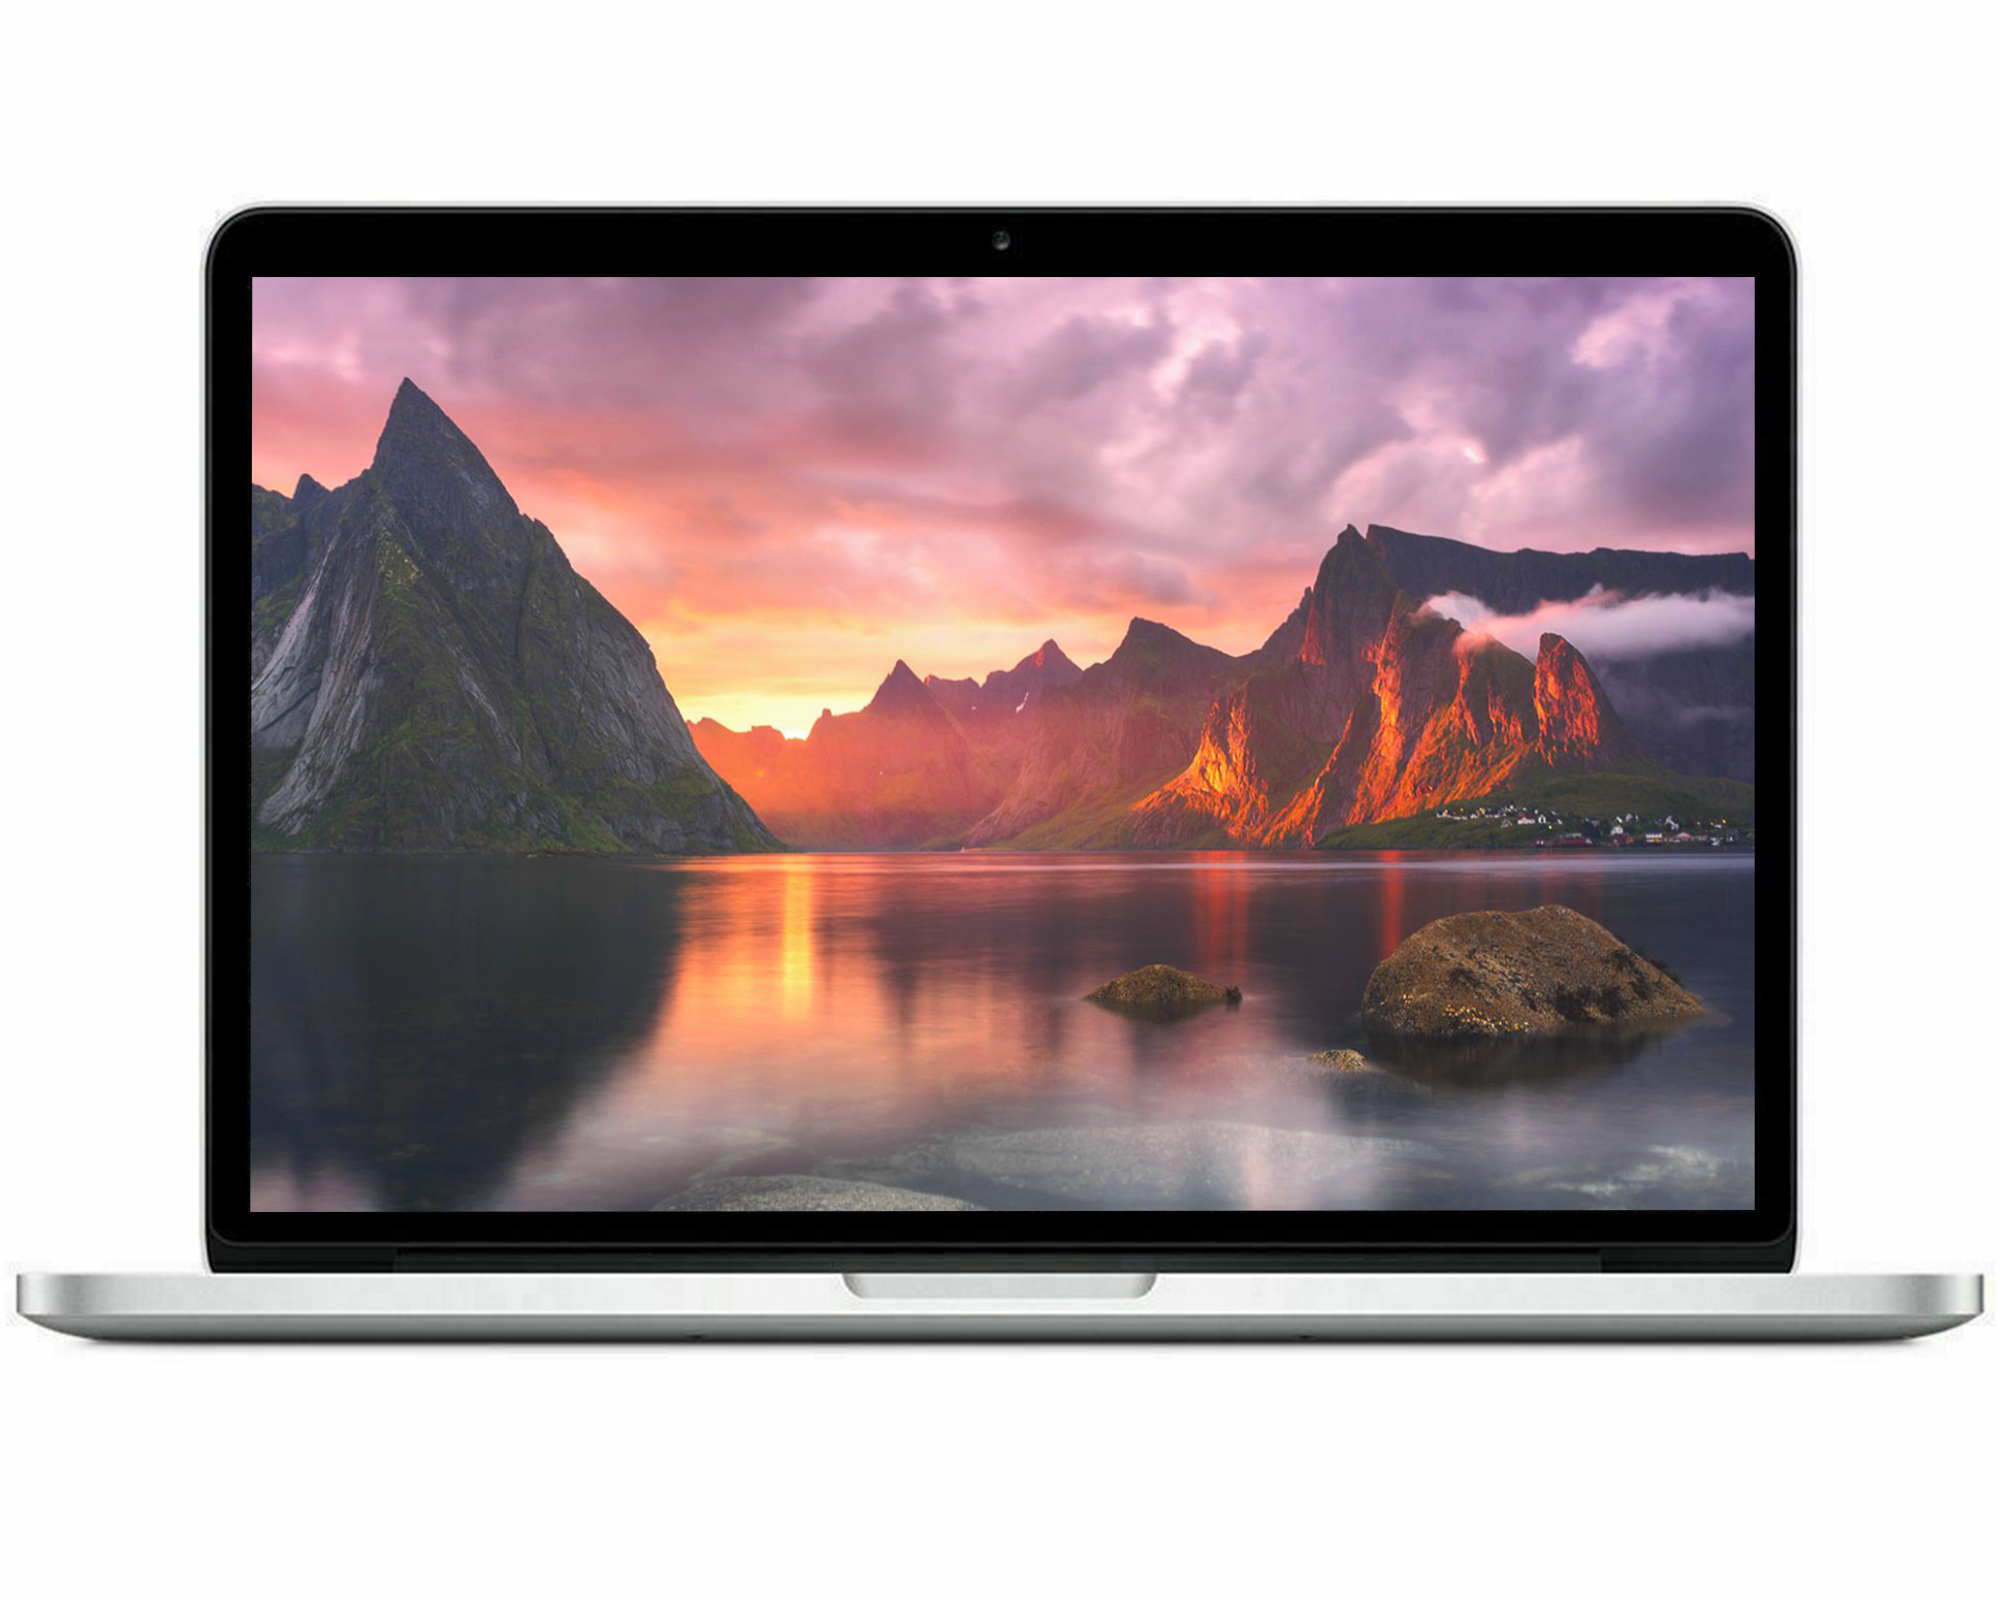 Restored | Apple MacBook Pro | 13.3-inch | 2.7/2.9GHz | Intel Core i5 | 8GB RAM | 128GB SSD | Bundle: USA Essentials Bluetooth/Wireless Airbuds, Black Case, Wireless Mouse By Certified 2 Day Express - image 5 of 5